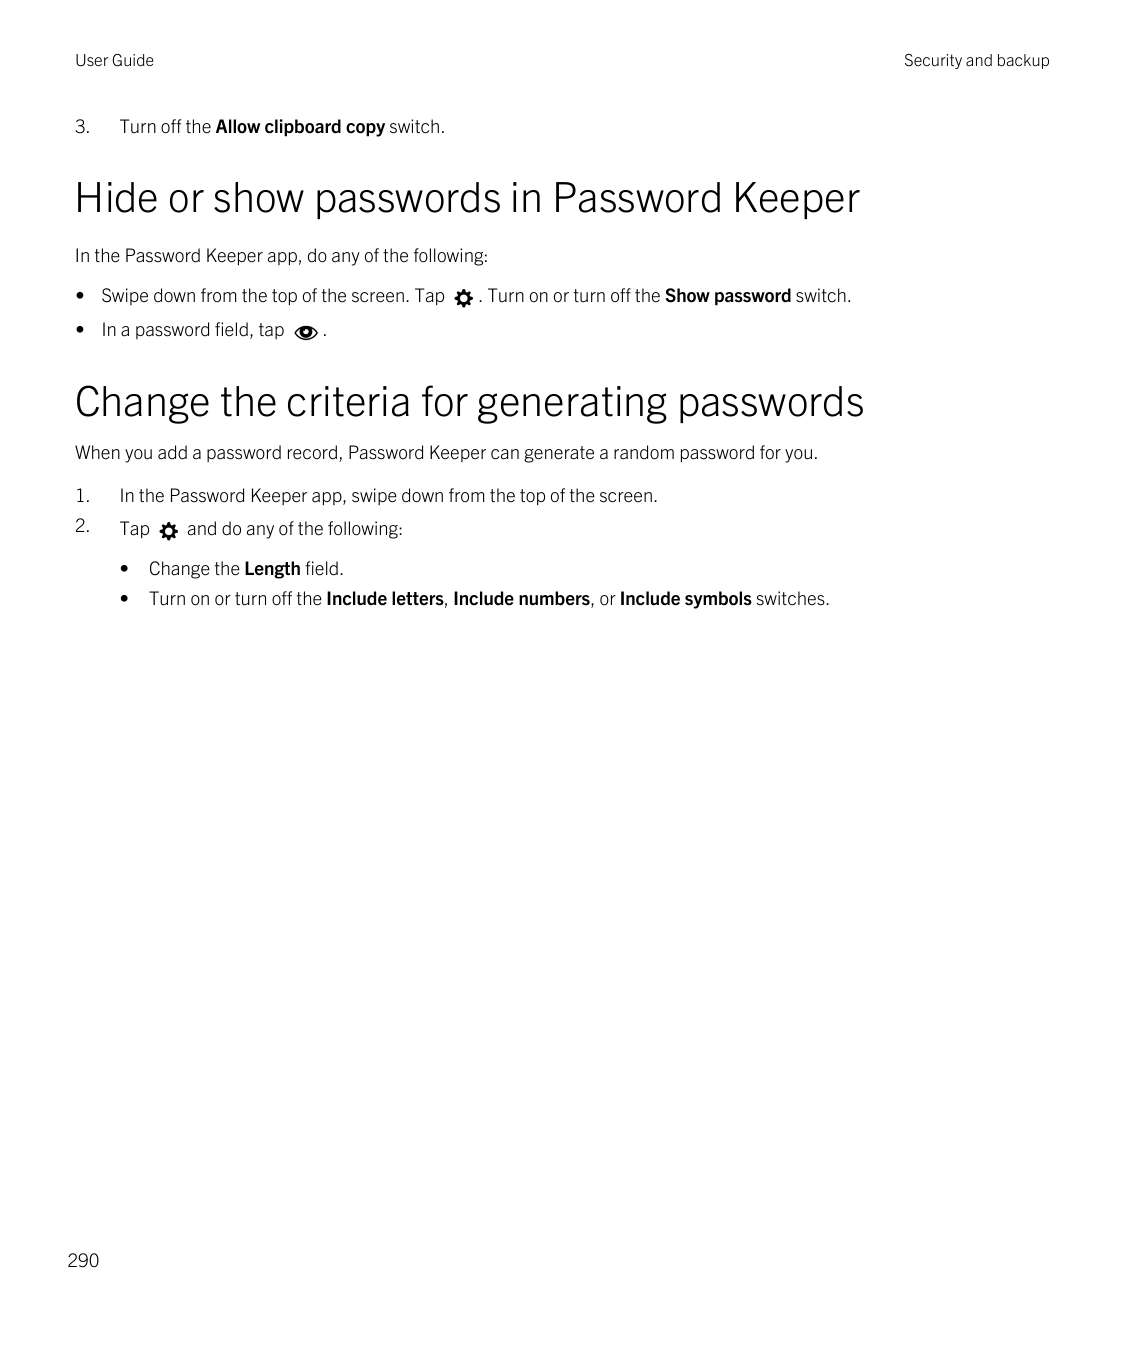 User Guide3.Security and backupTurn off the Allow clipboard copy switch.Hide or show passwords in Password KeeperIn the Password